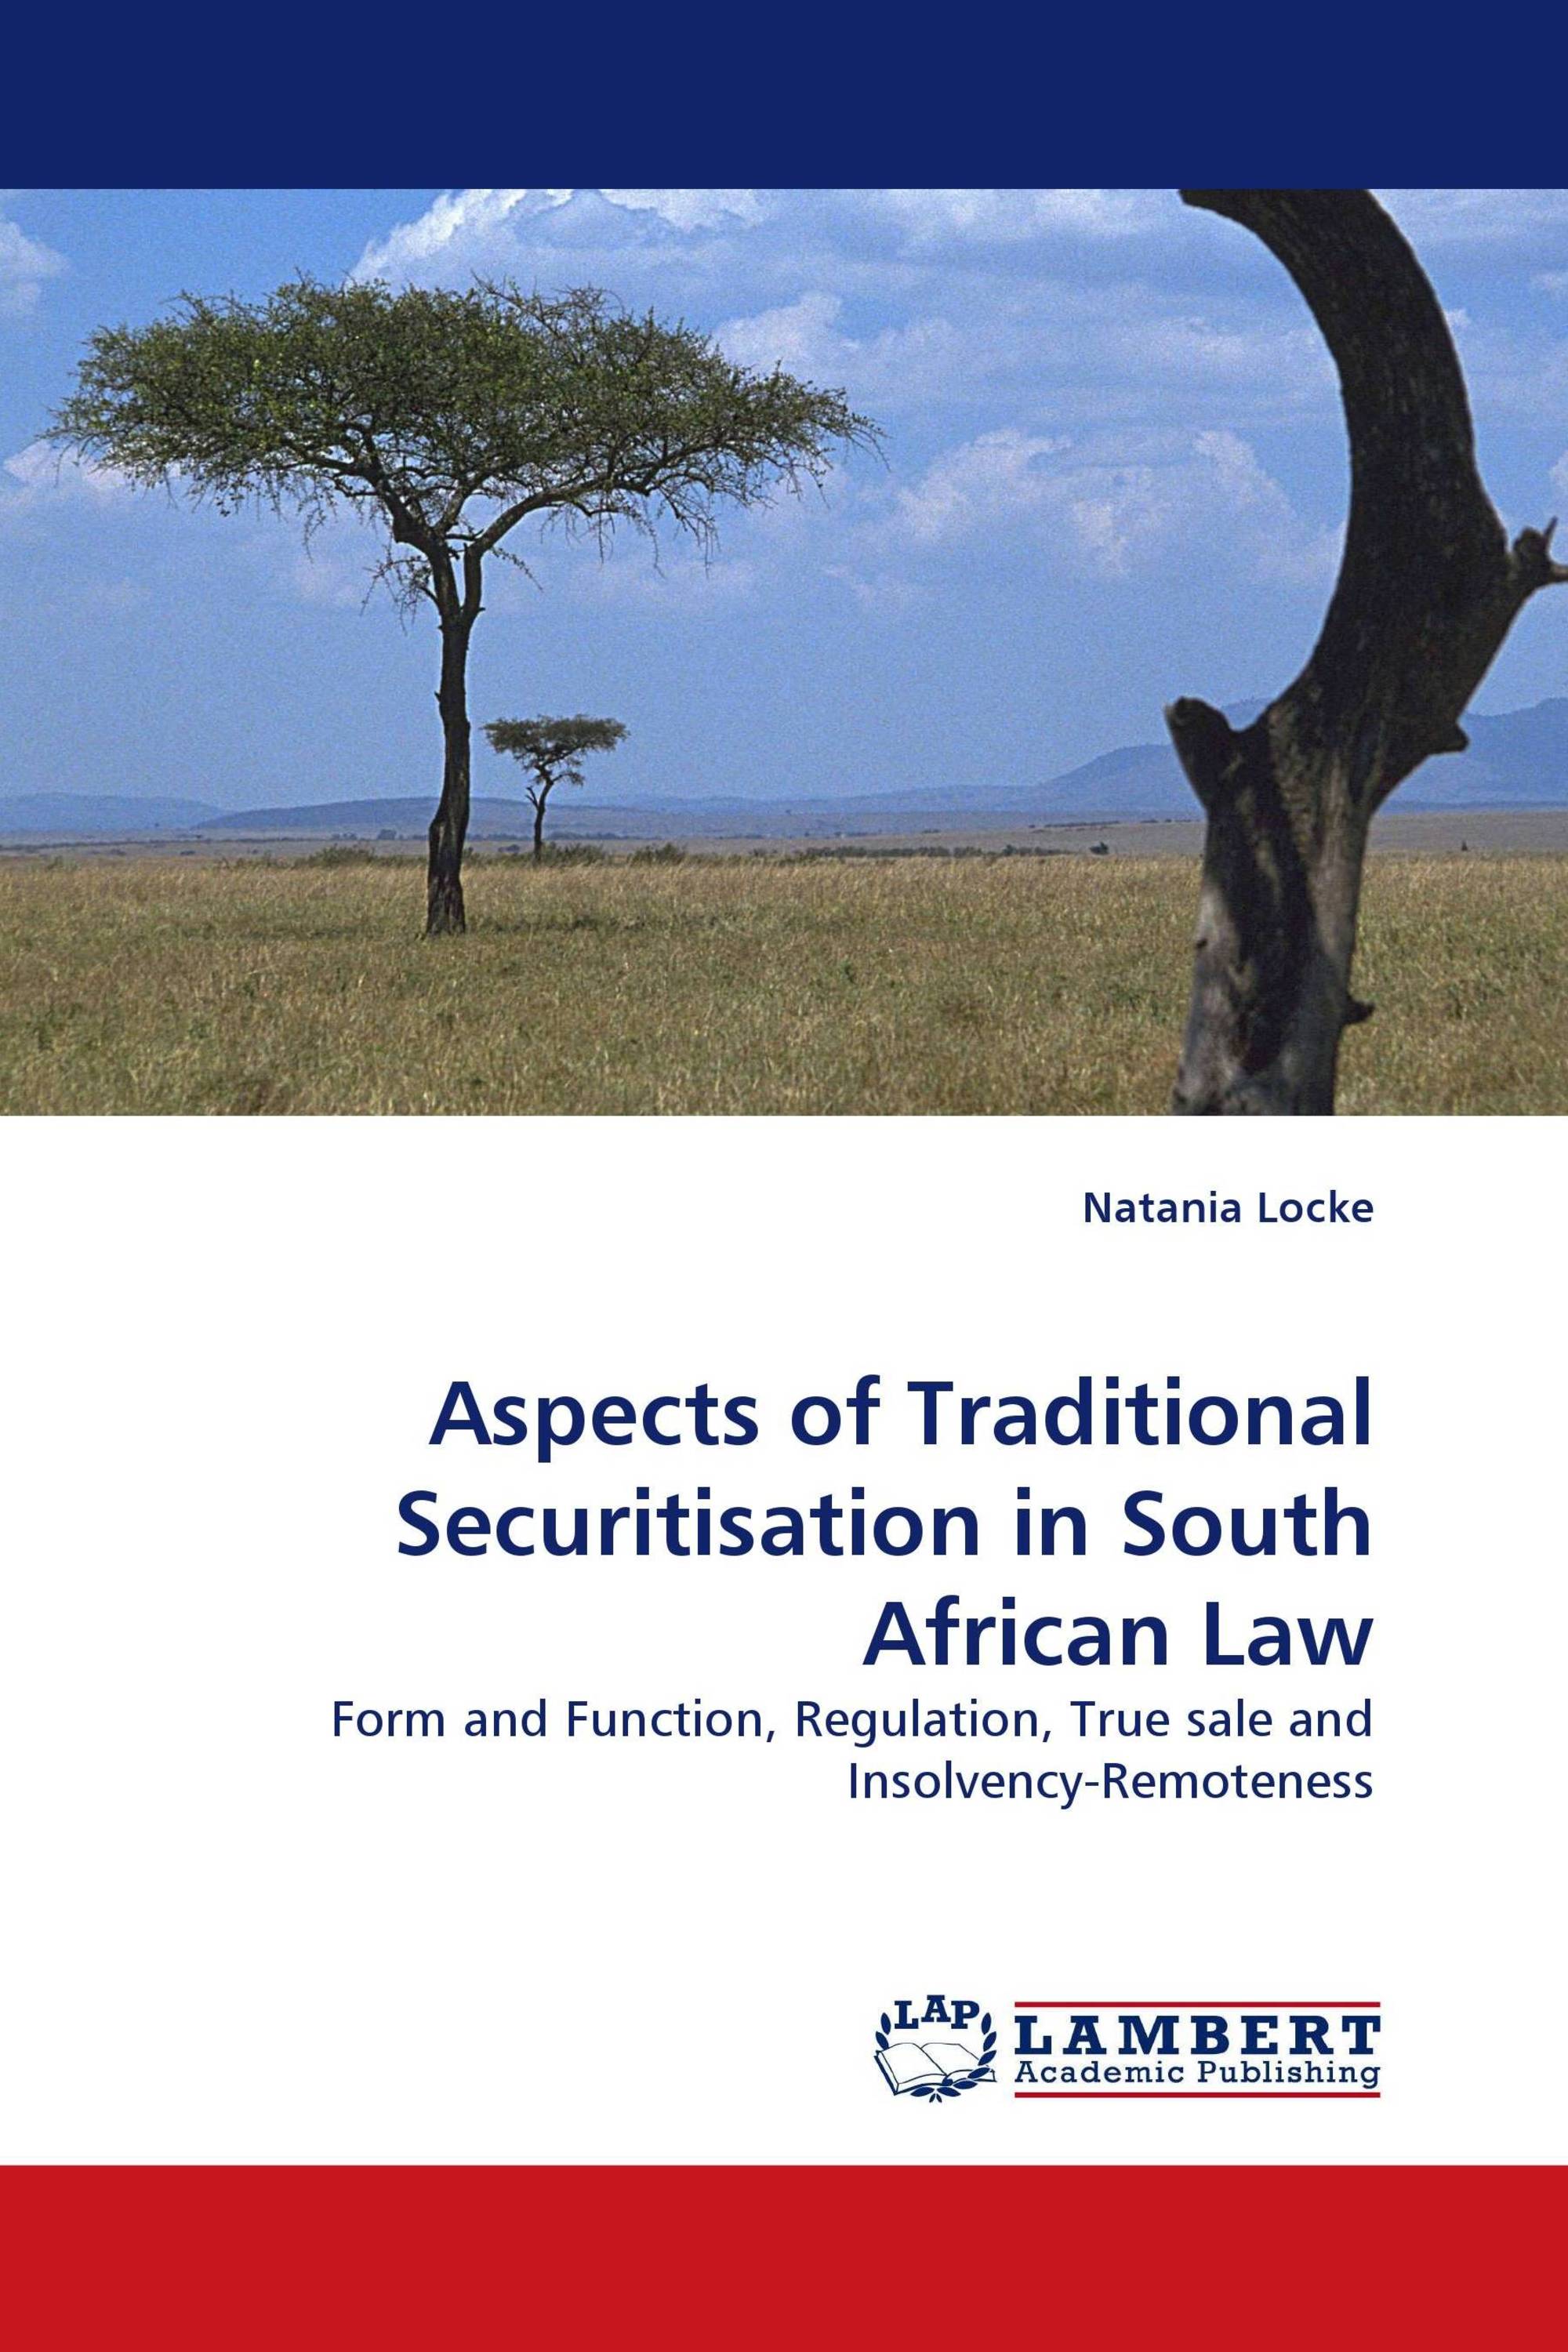 Aspects of Traditional Securitisation in South African Law